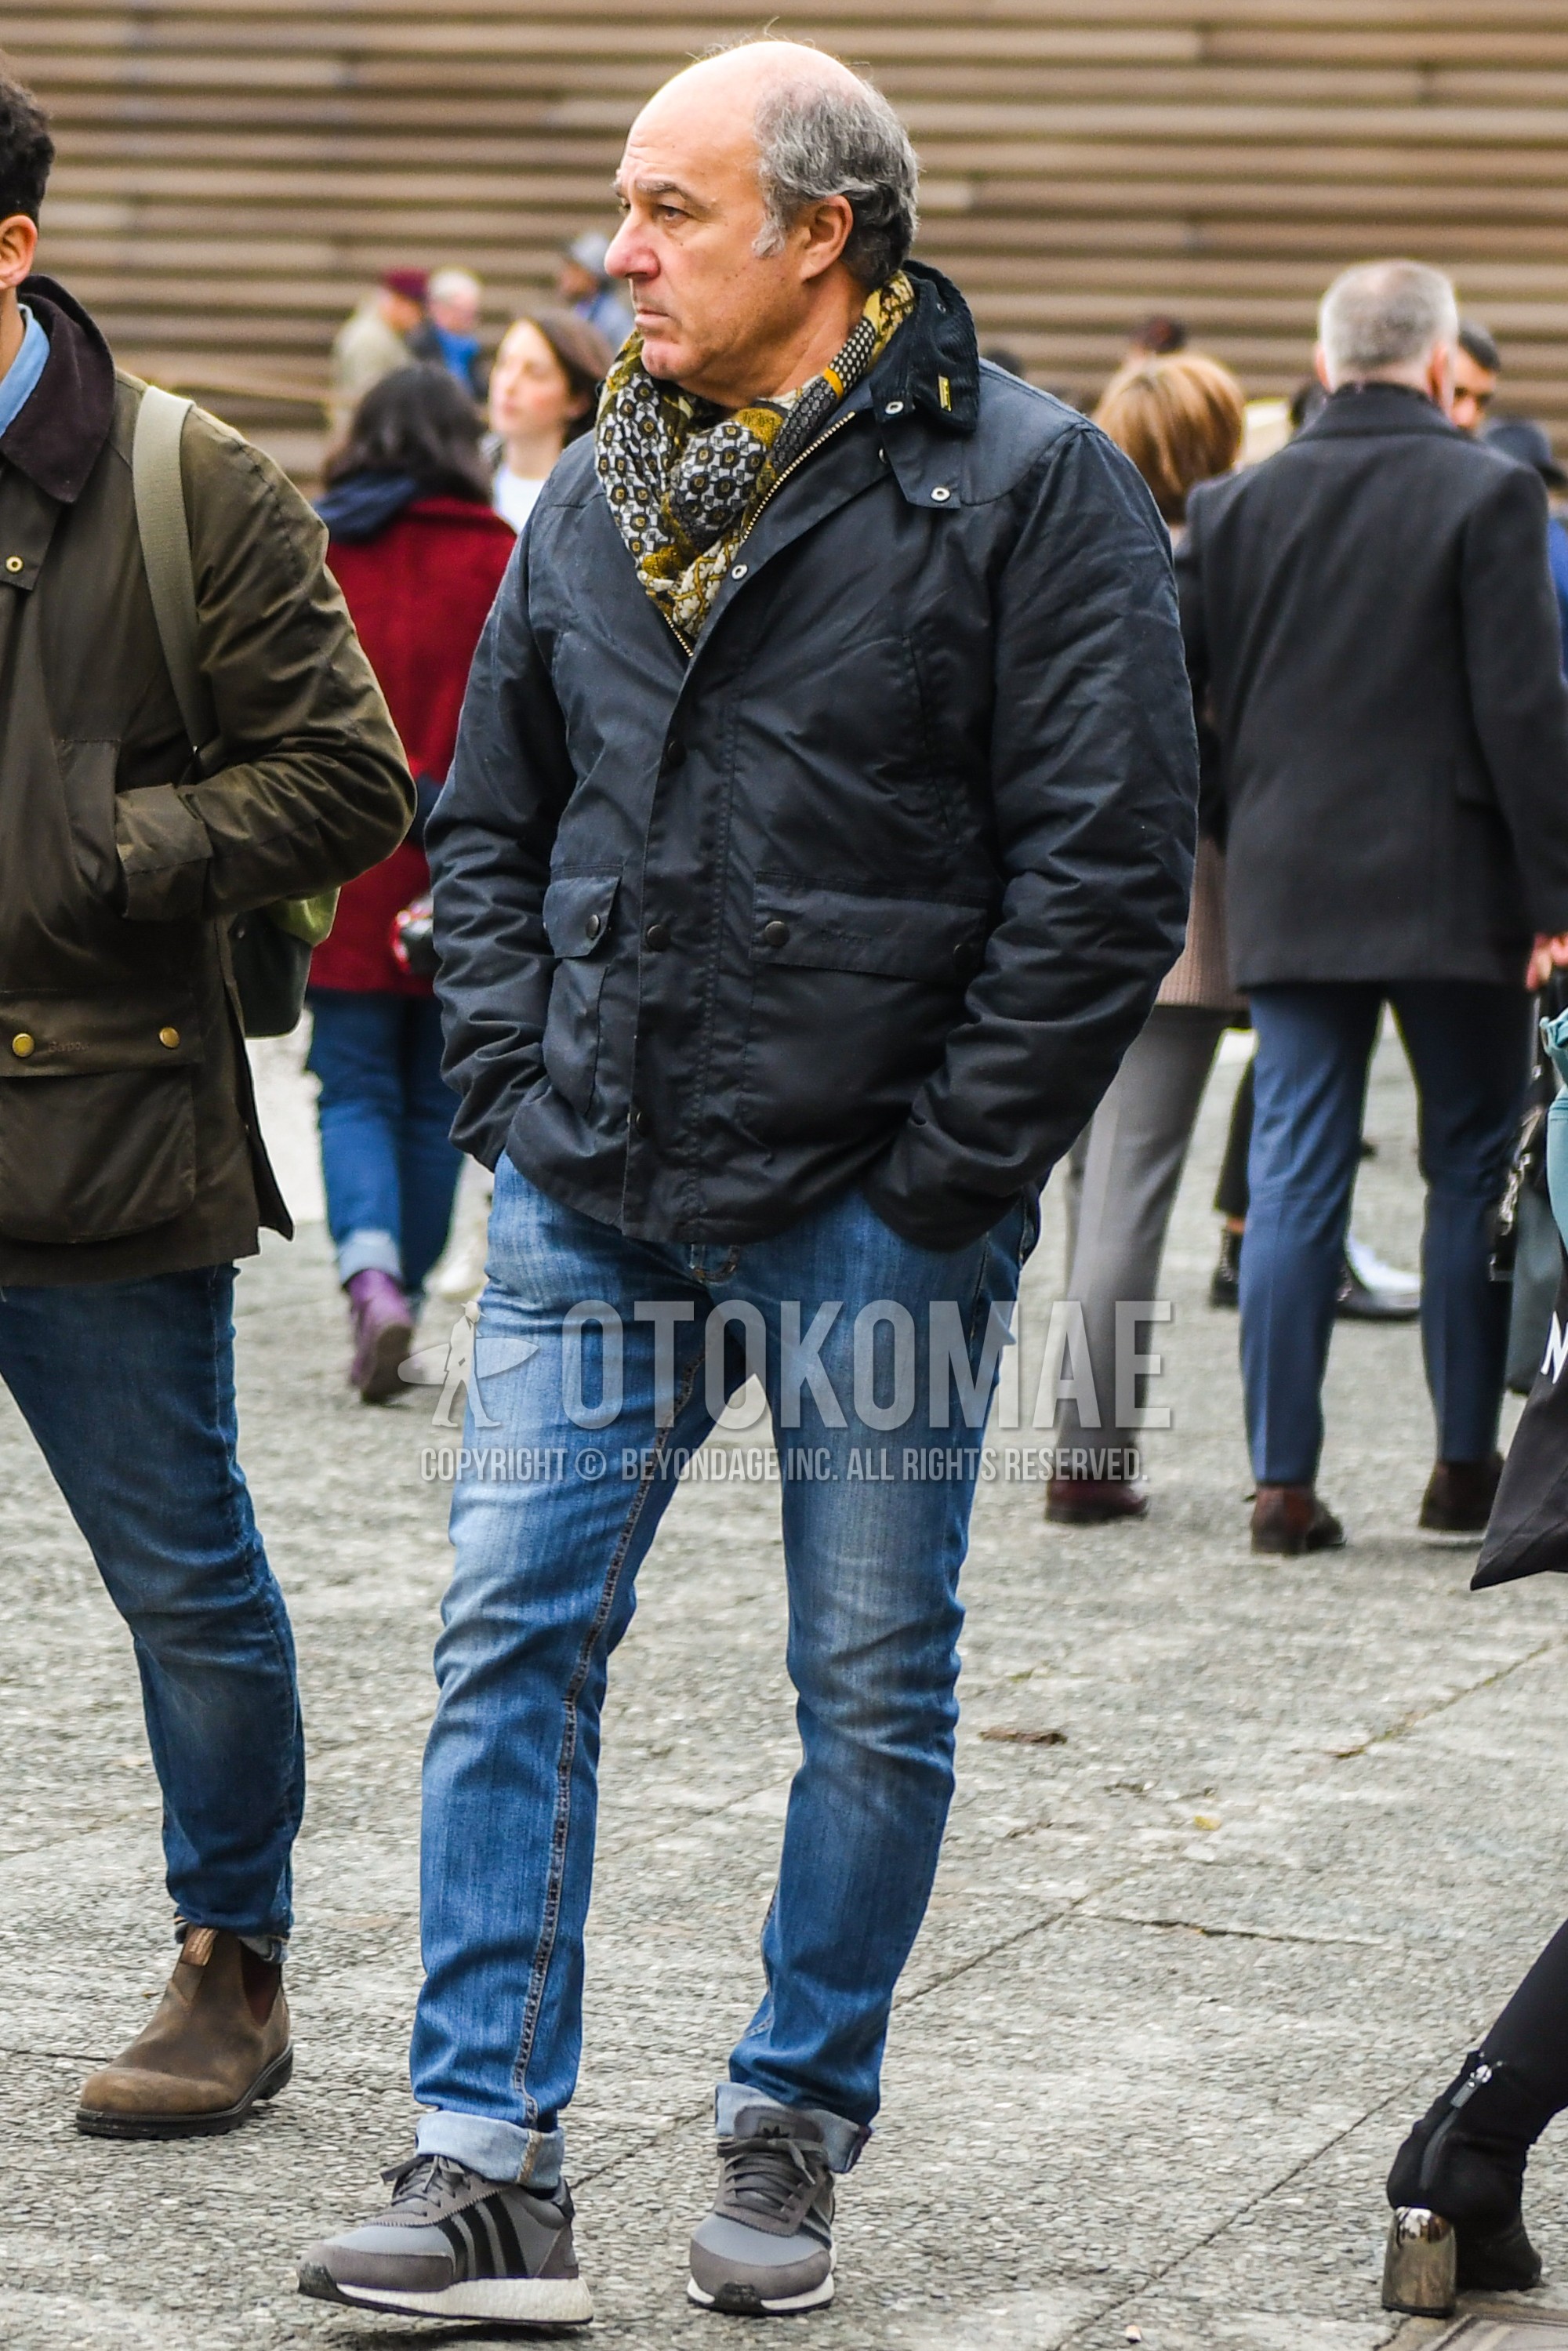 Men's winter outfit with yellow scarf scarf, black plain outerwear, light blue plain denim/jeans, gray low-cut sneakers.